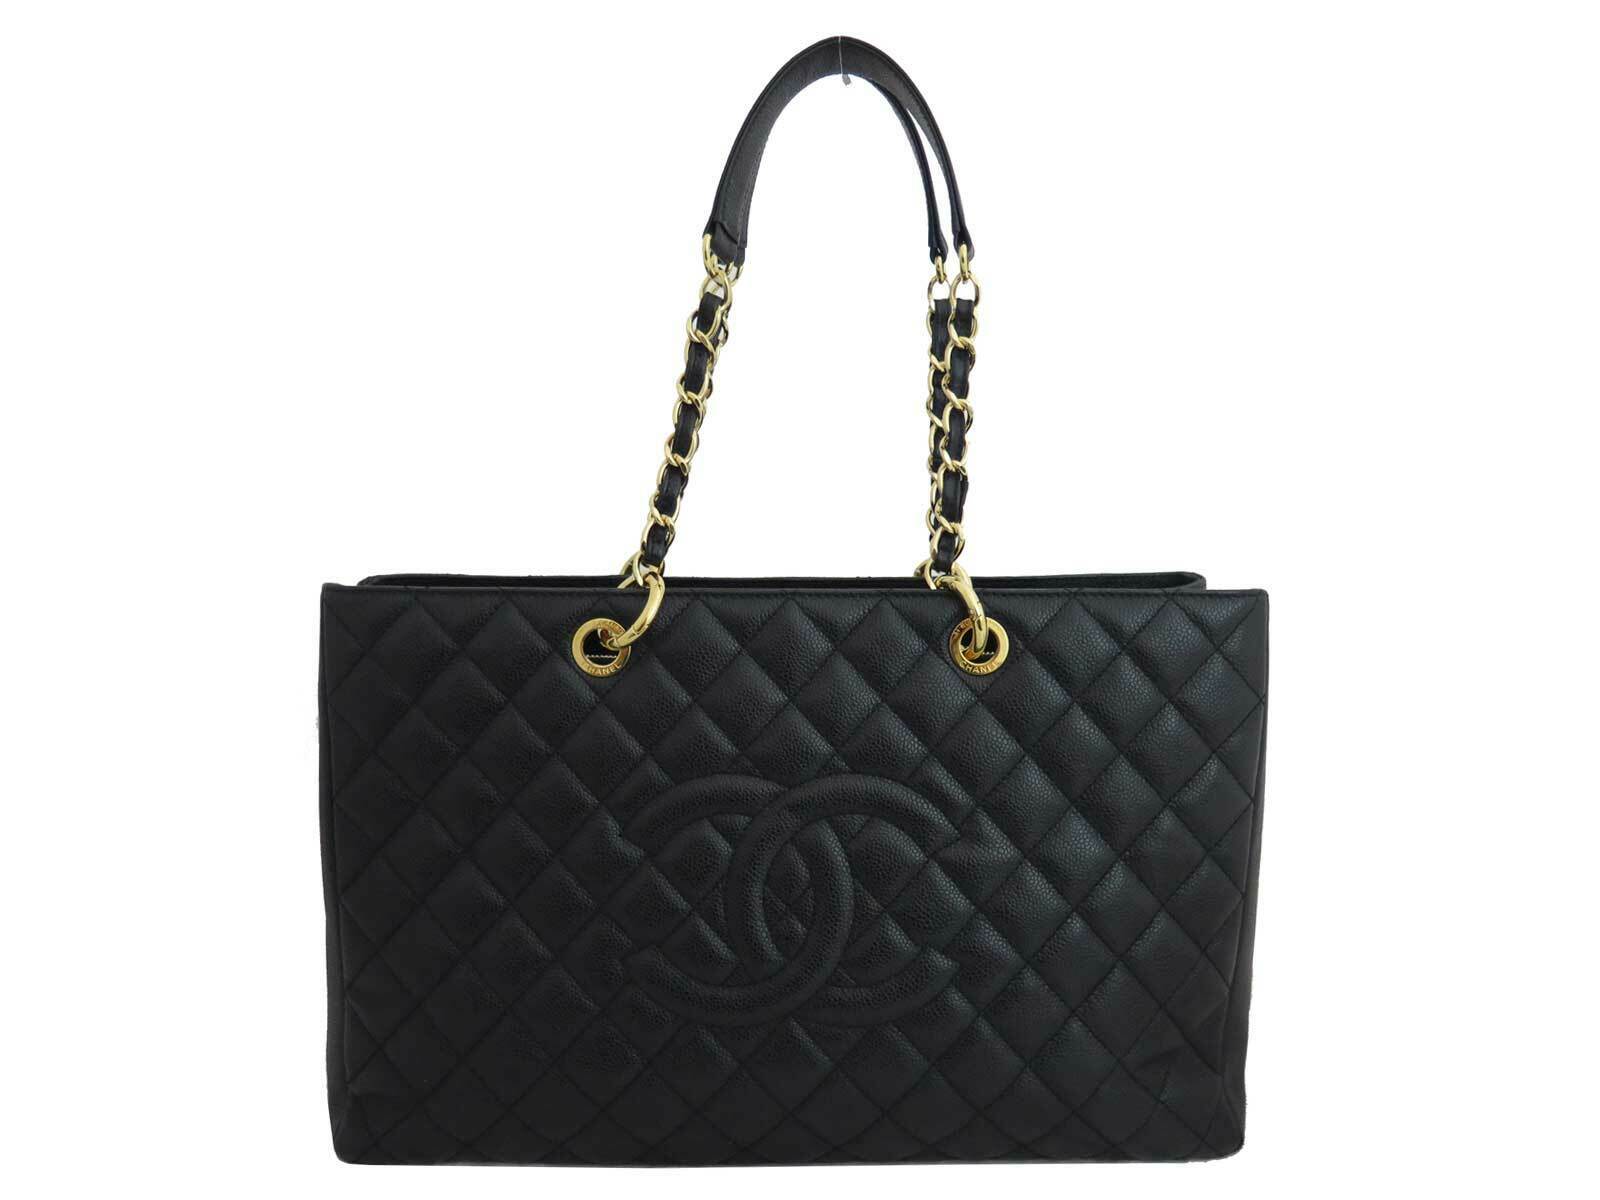 Best Designer Laptop Bags That Fit a MacBook Pro 15" chanel shopping tote